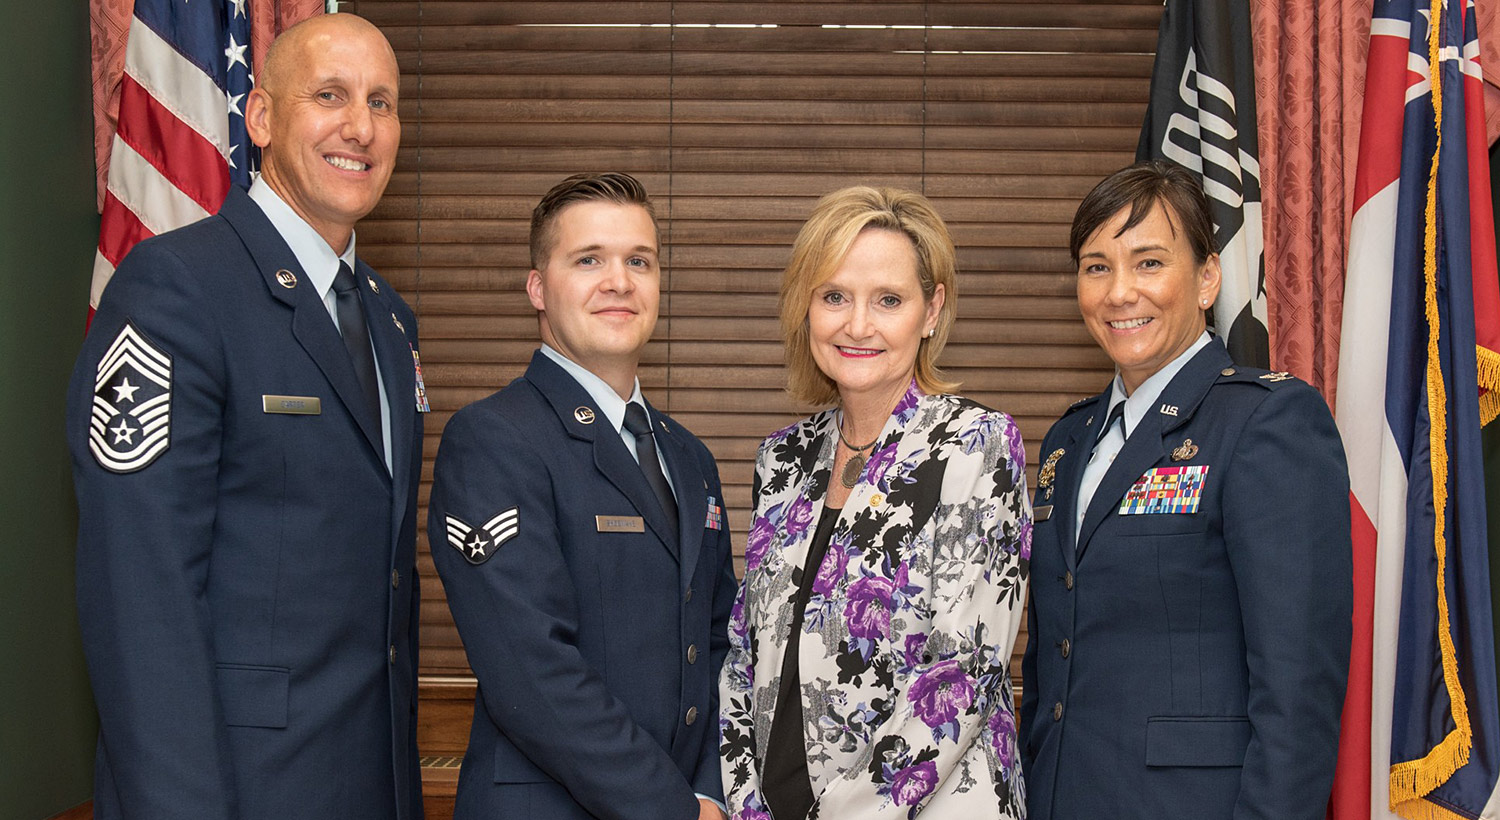 Senator Hyde-Smith meets with the leadership of the Keesler AFB 81st Training Wing